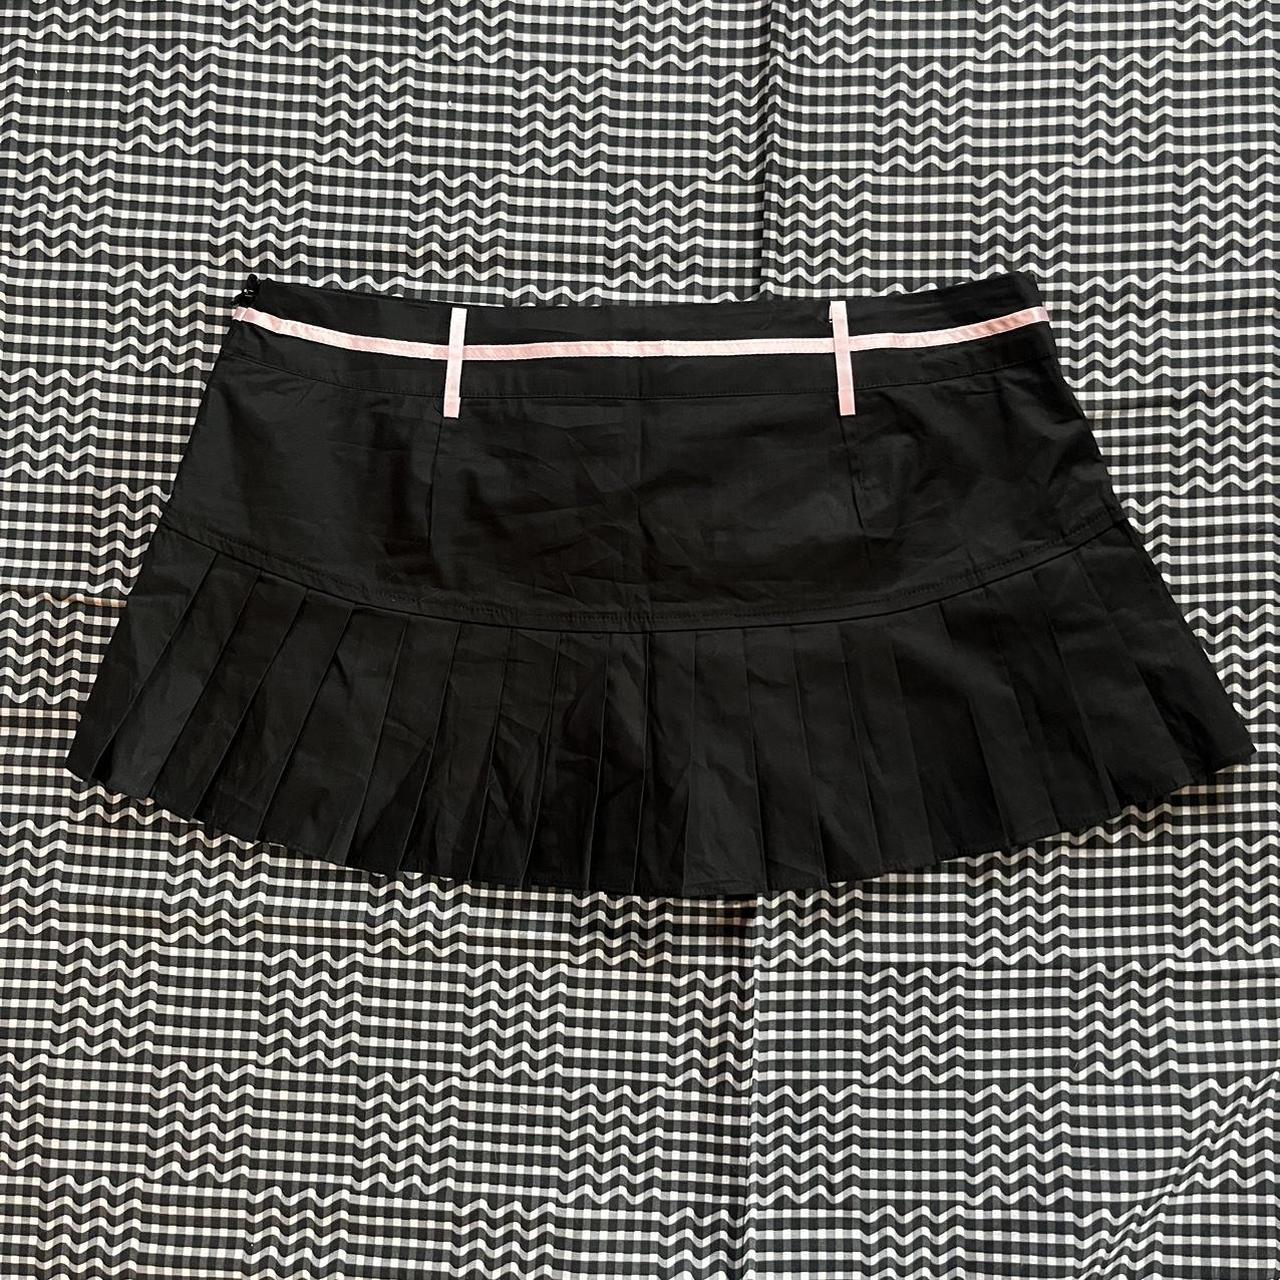 zip up reflective skirt, never worn only selling as - Depop